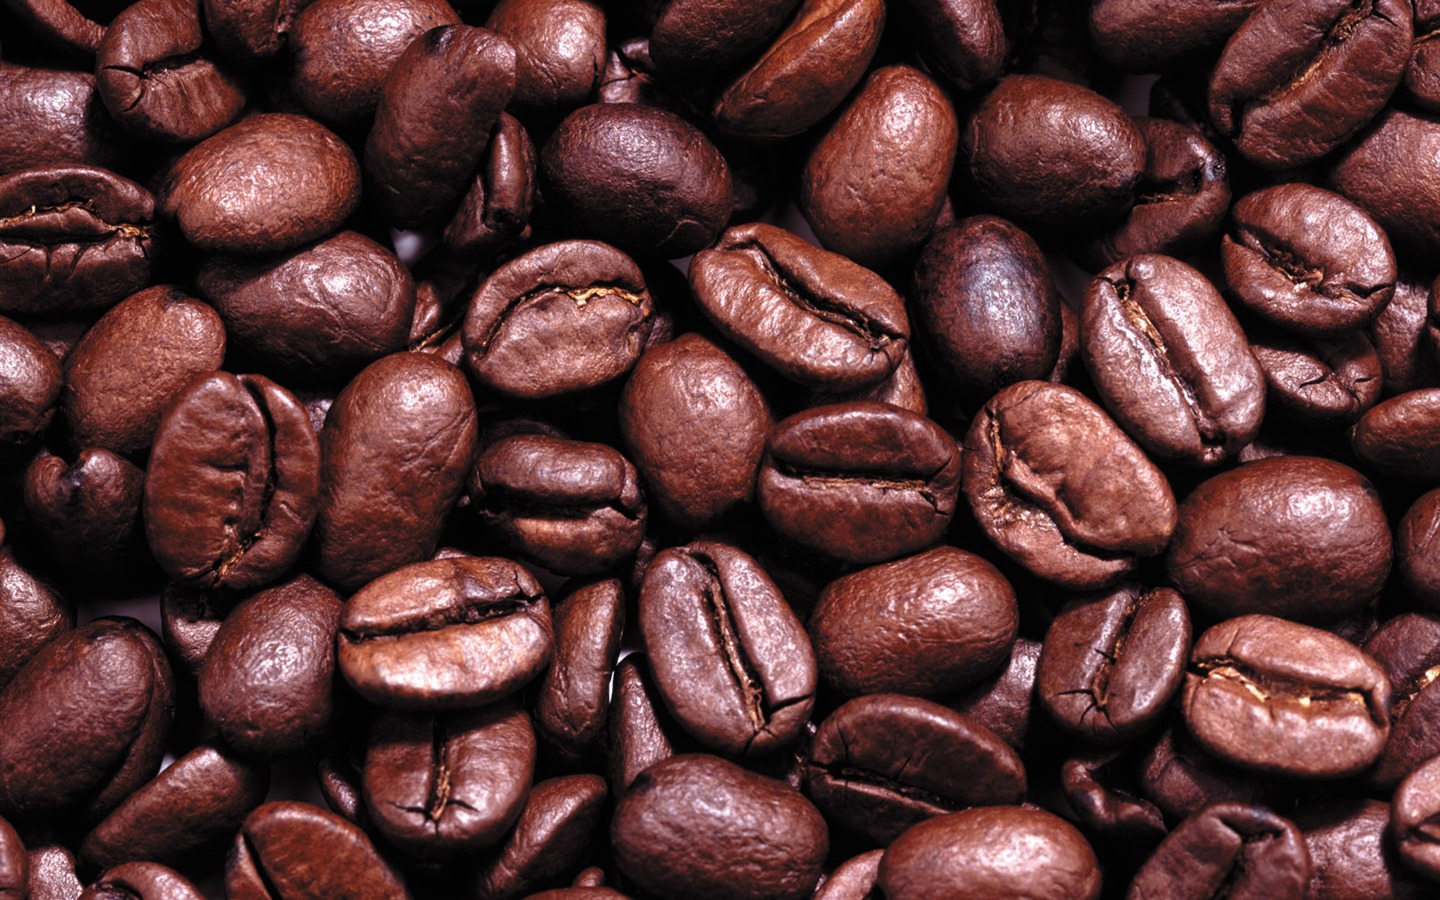 Coffee feature wallpaper (6) #12 - 1440x900